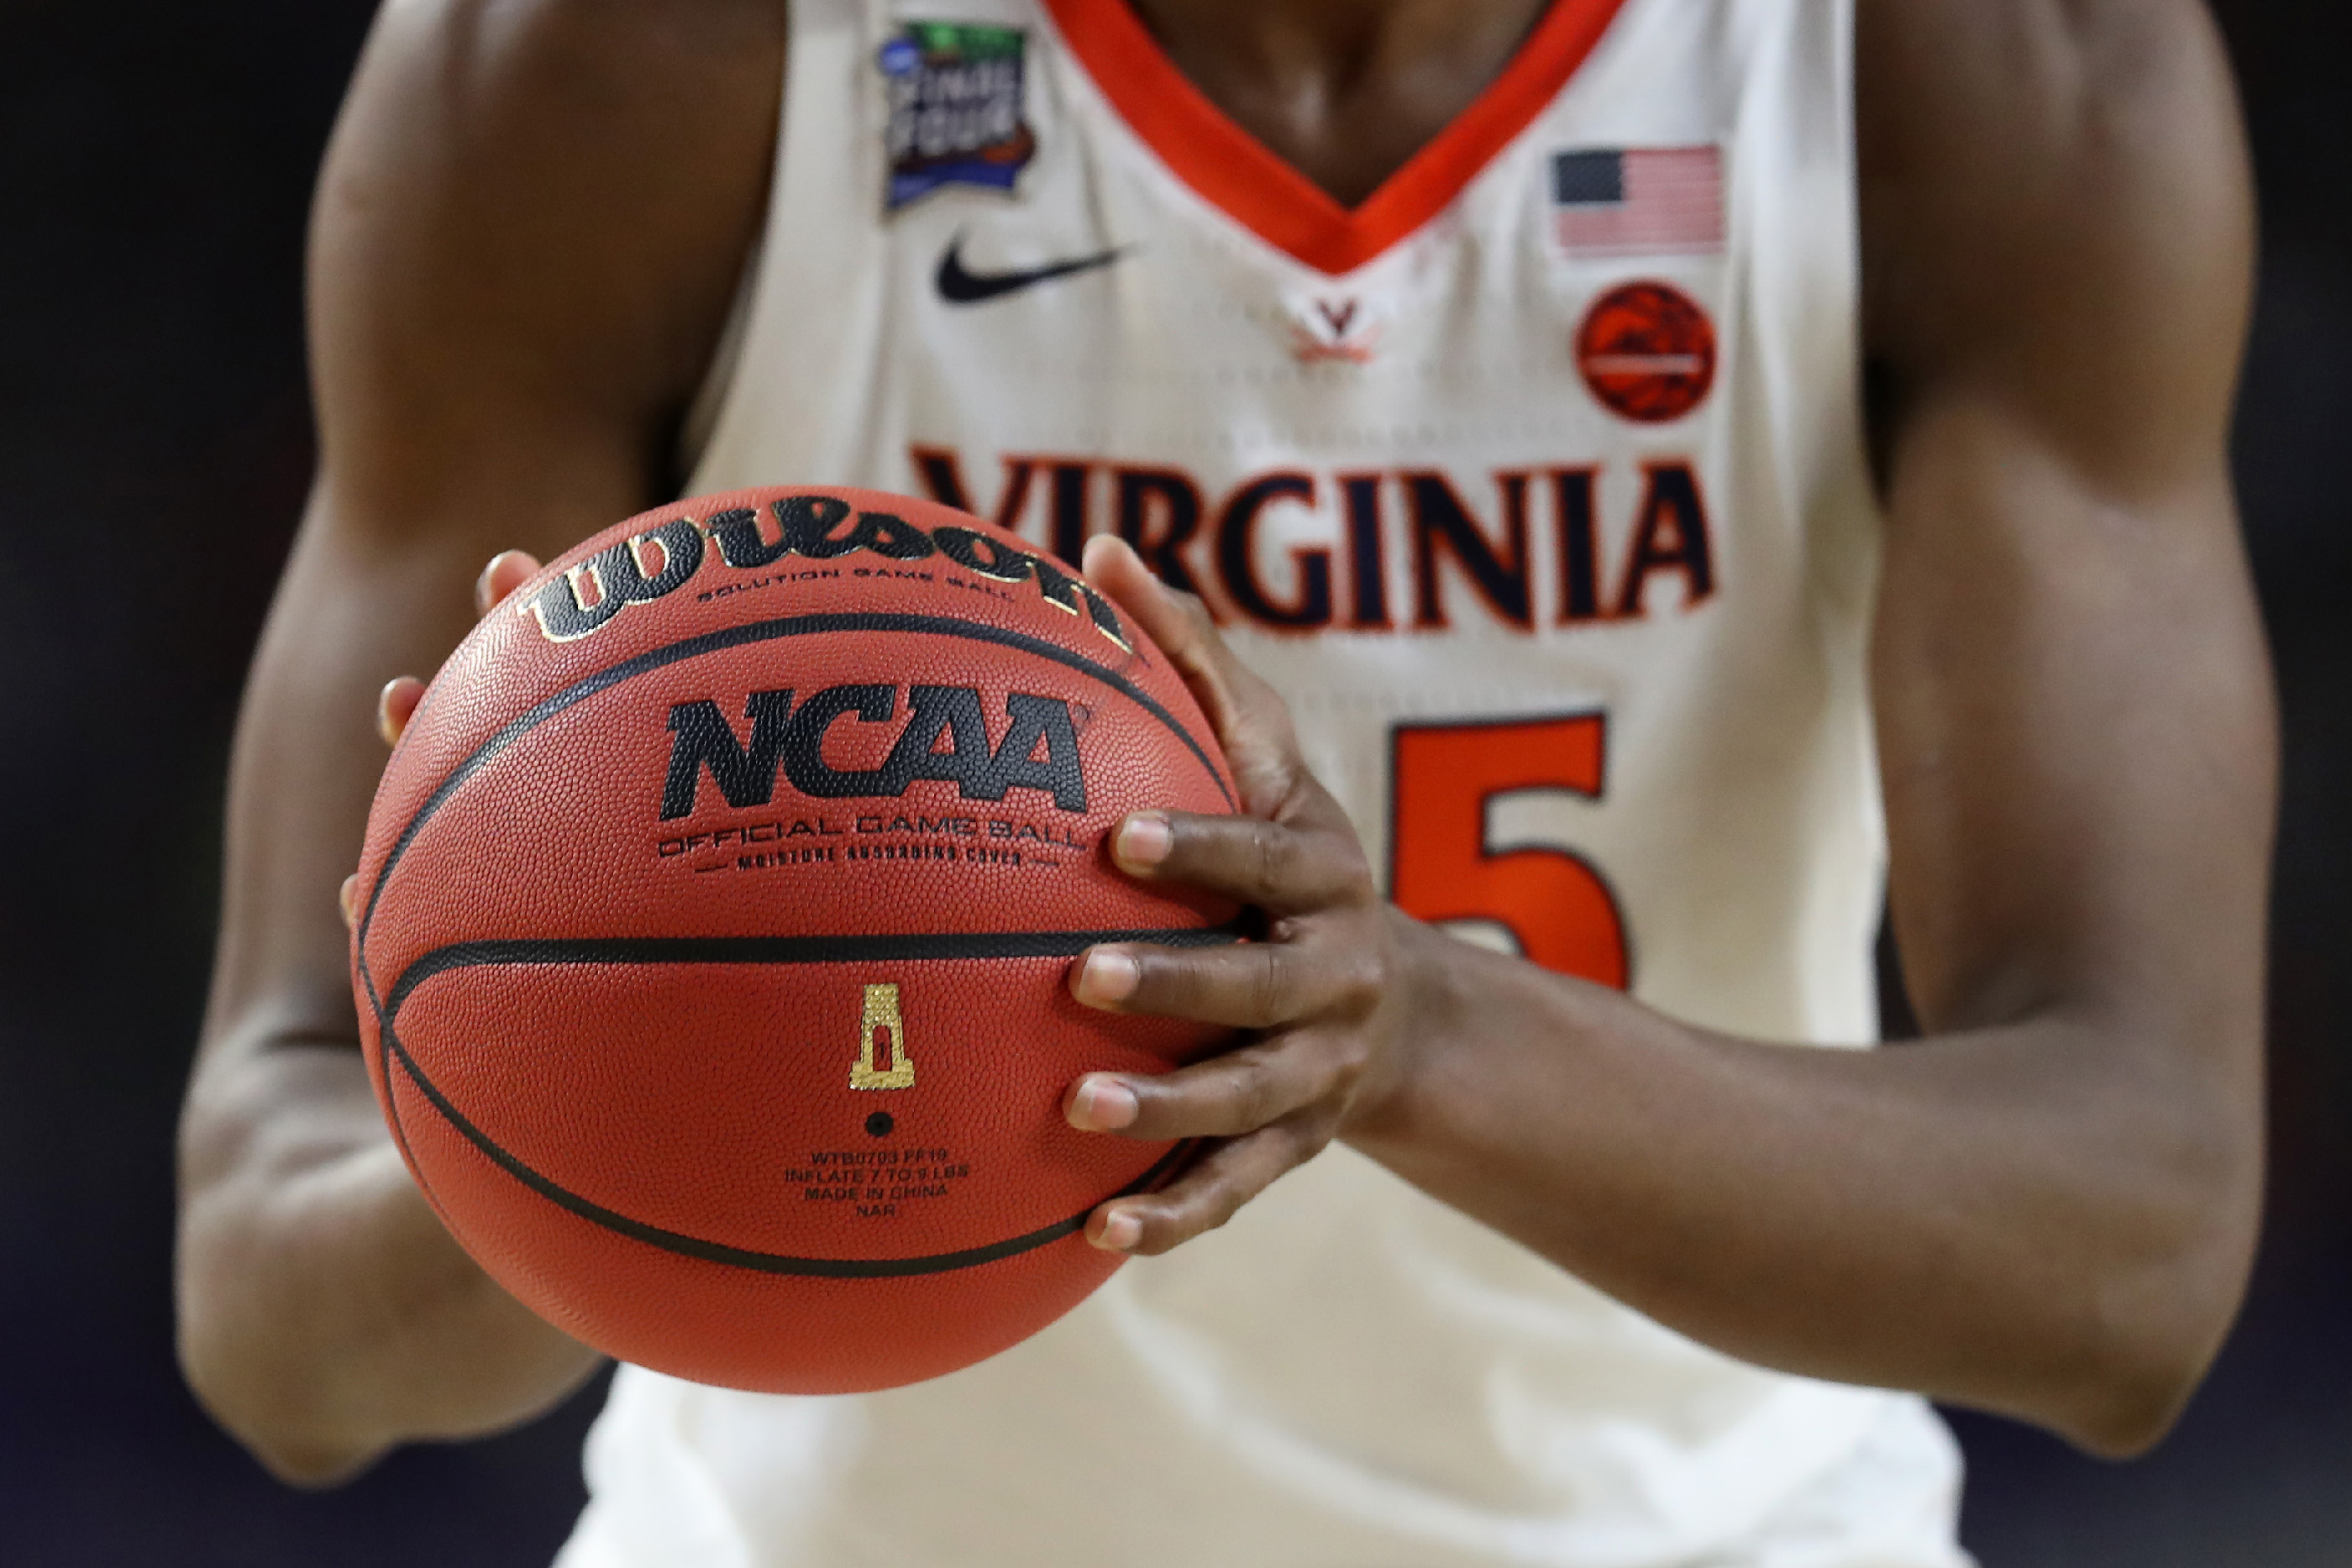 March Madness gear: How to buy 2019 Virginia NCAA tournament